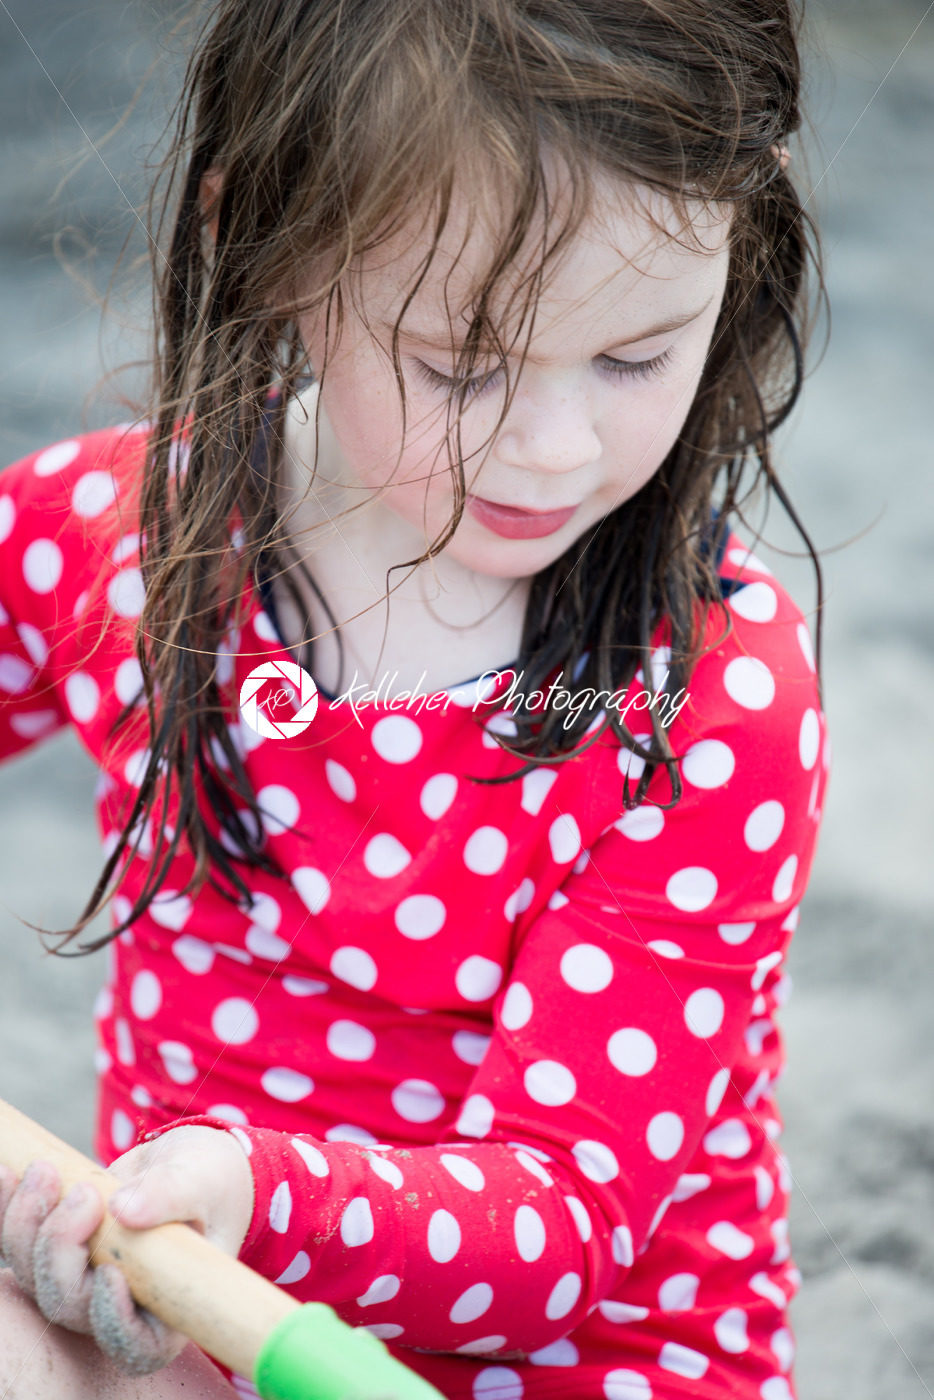 yound toddler girl having fun digging in the sand at the beach - Kelleher Photography Store